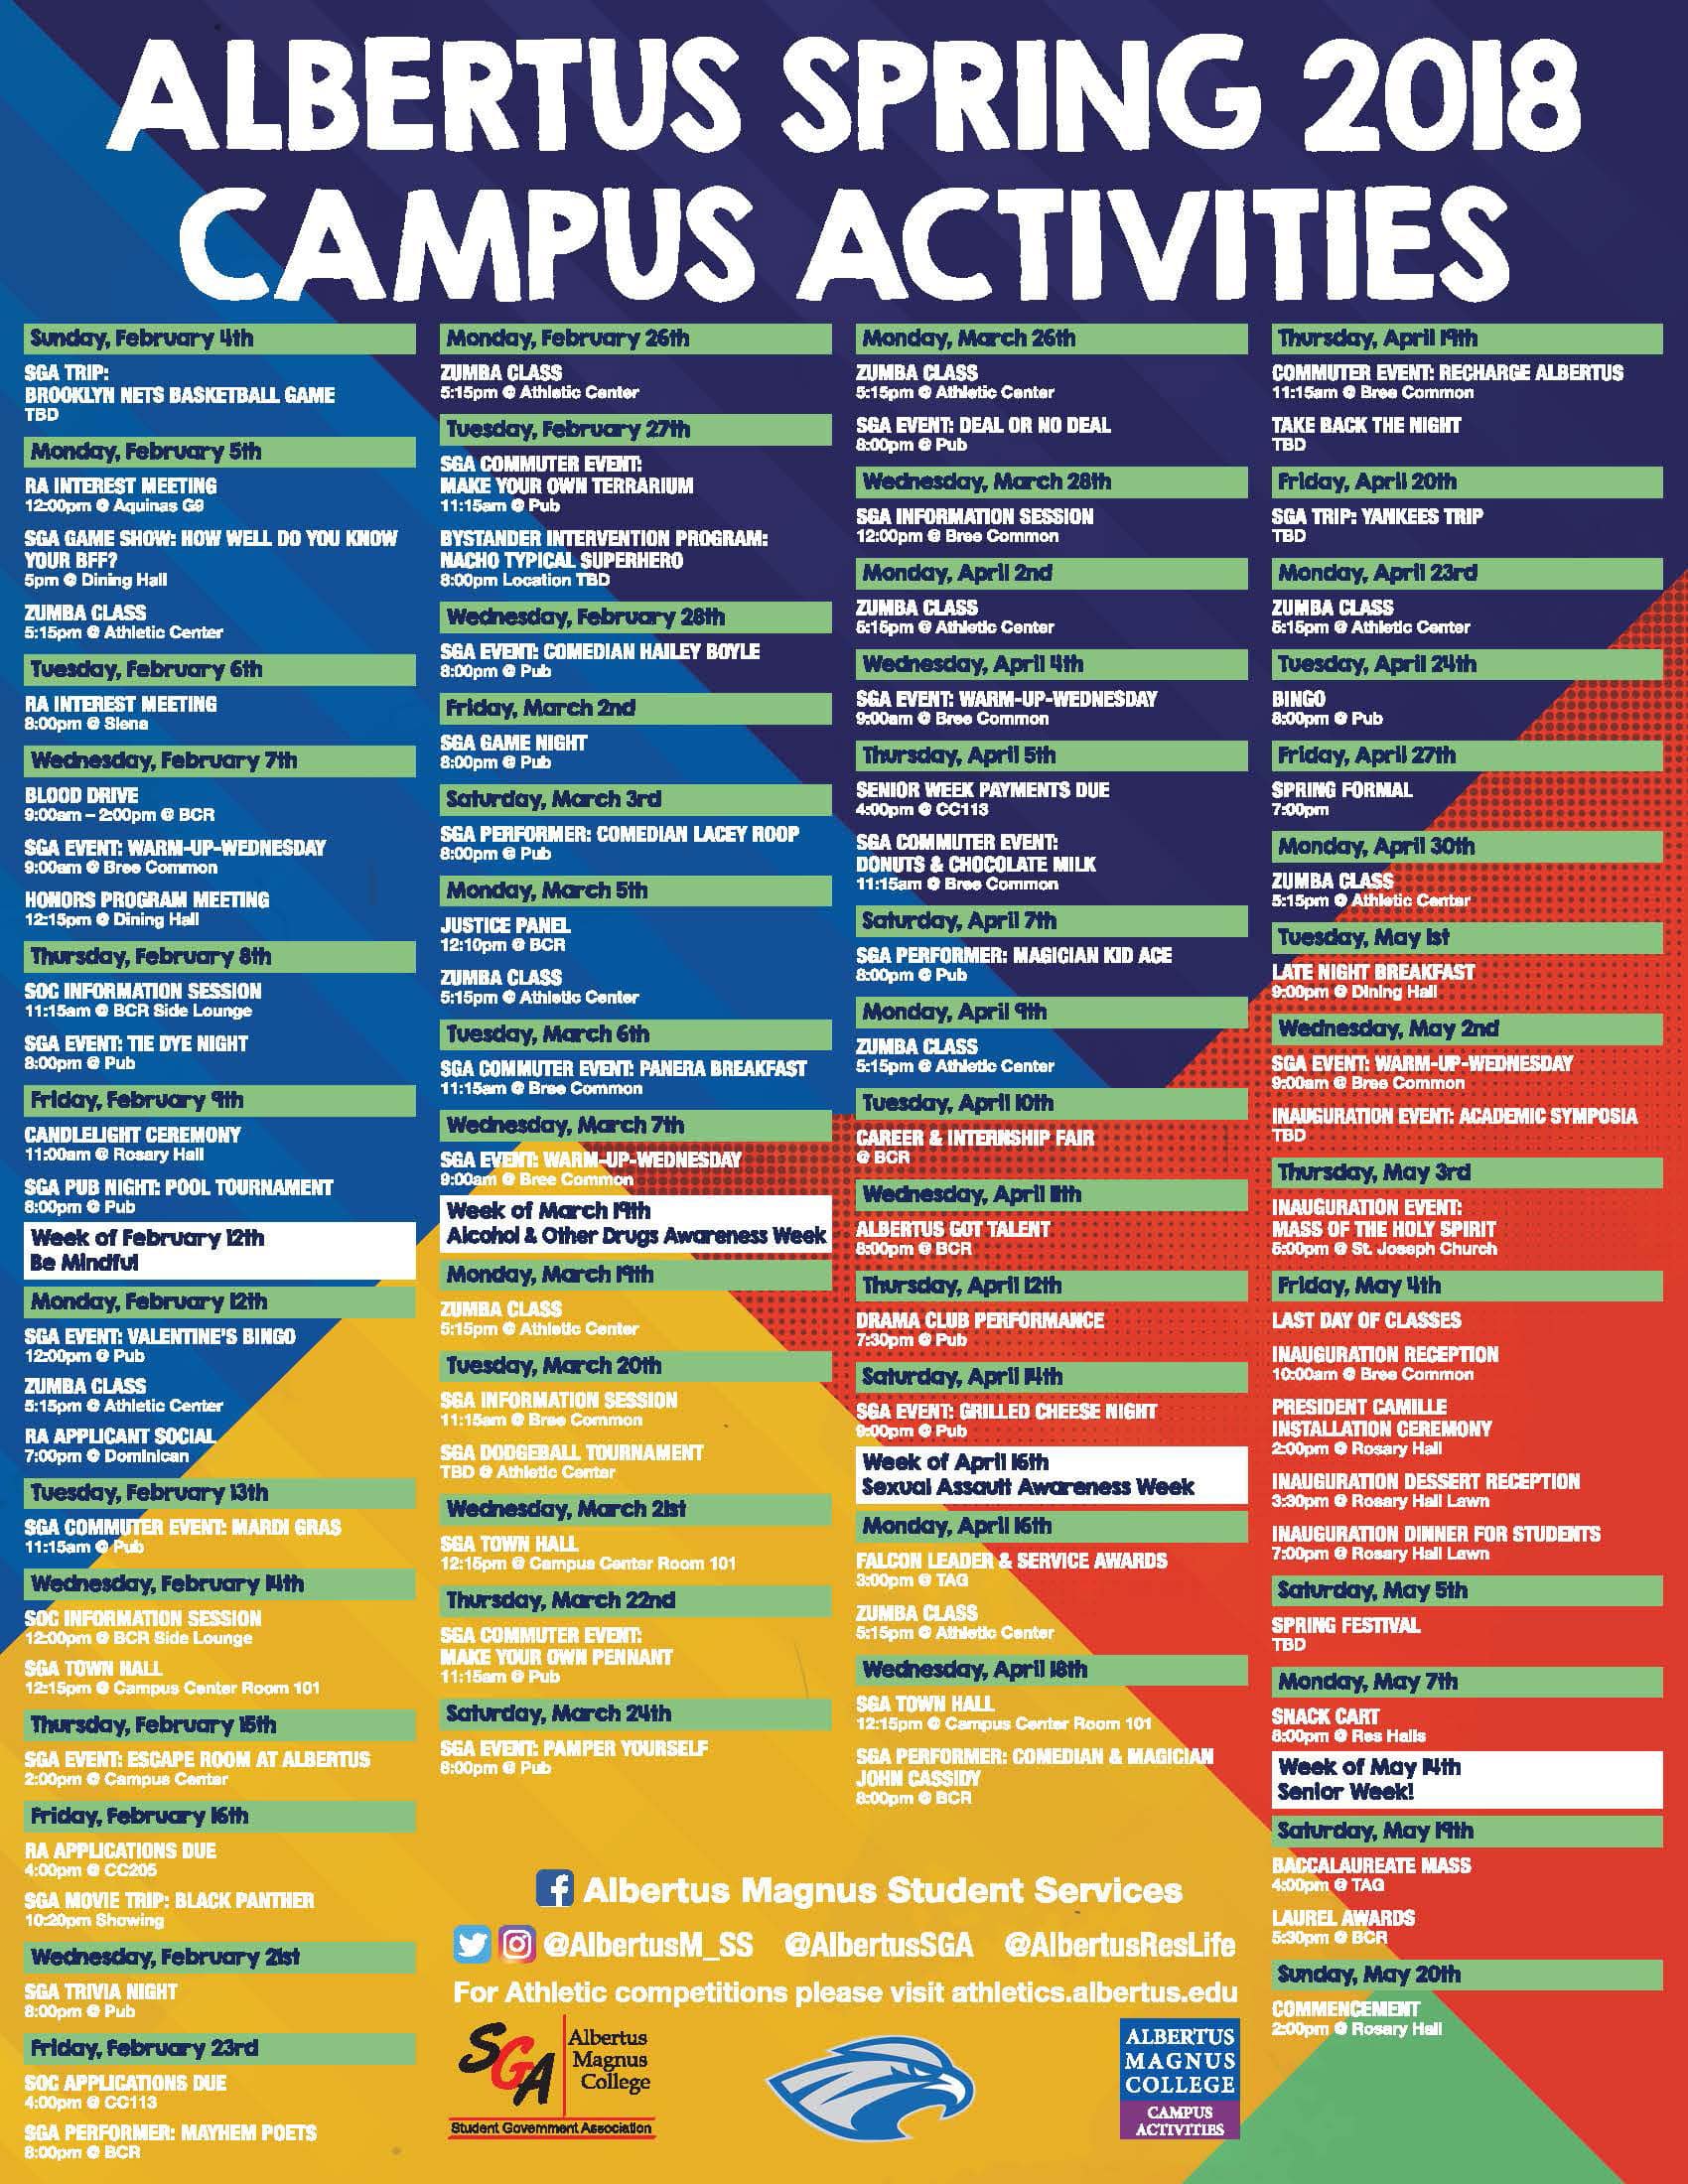 Student Services Monthly Calendar and Activities Poster at Albertus